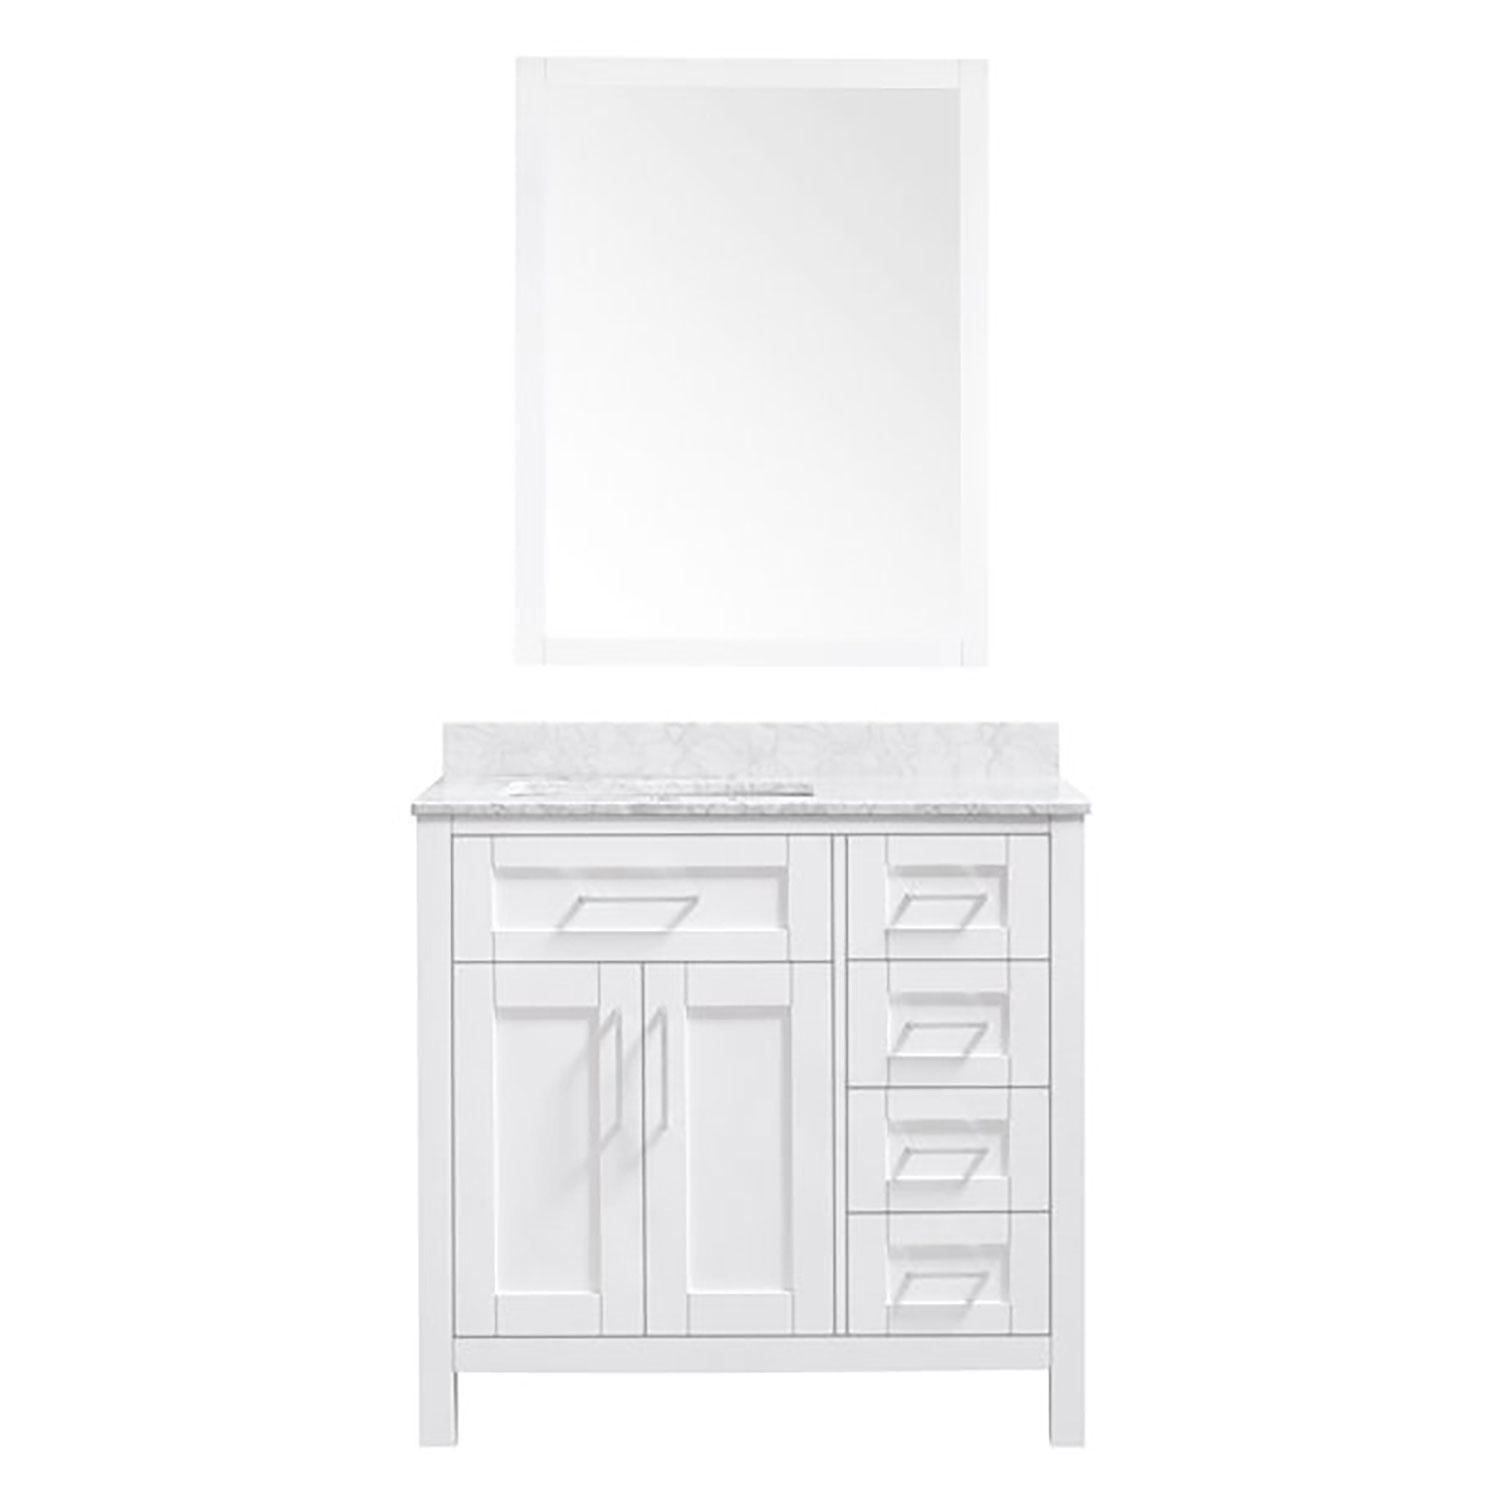 OVE Decors Tahoe 36 in. Bathroom Vanity in White with Mirror